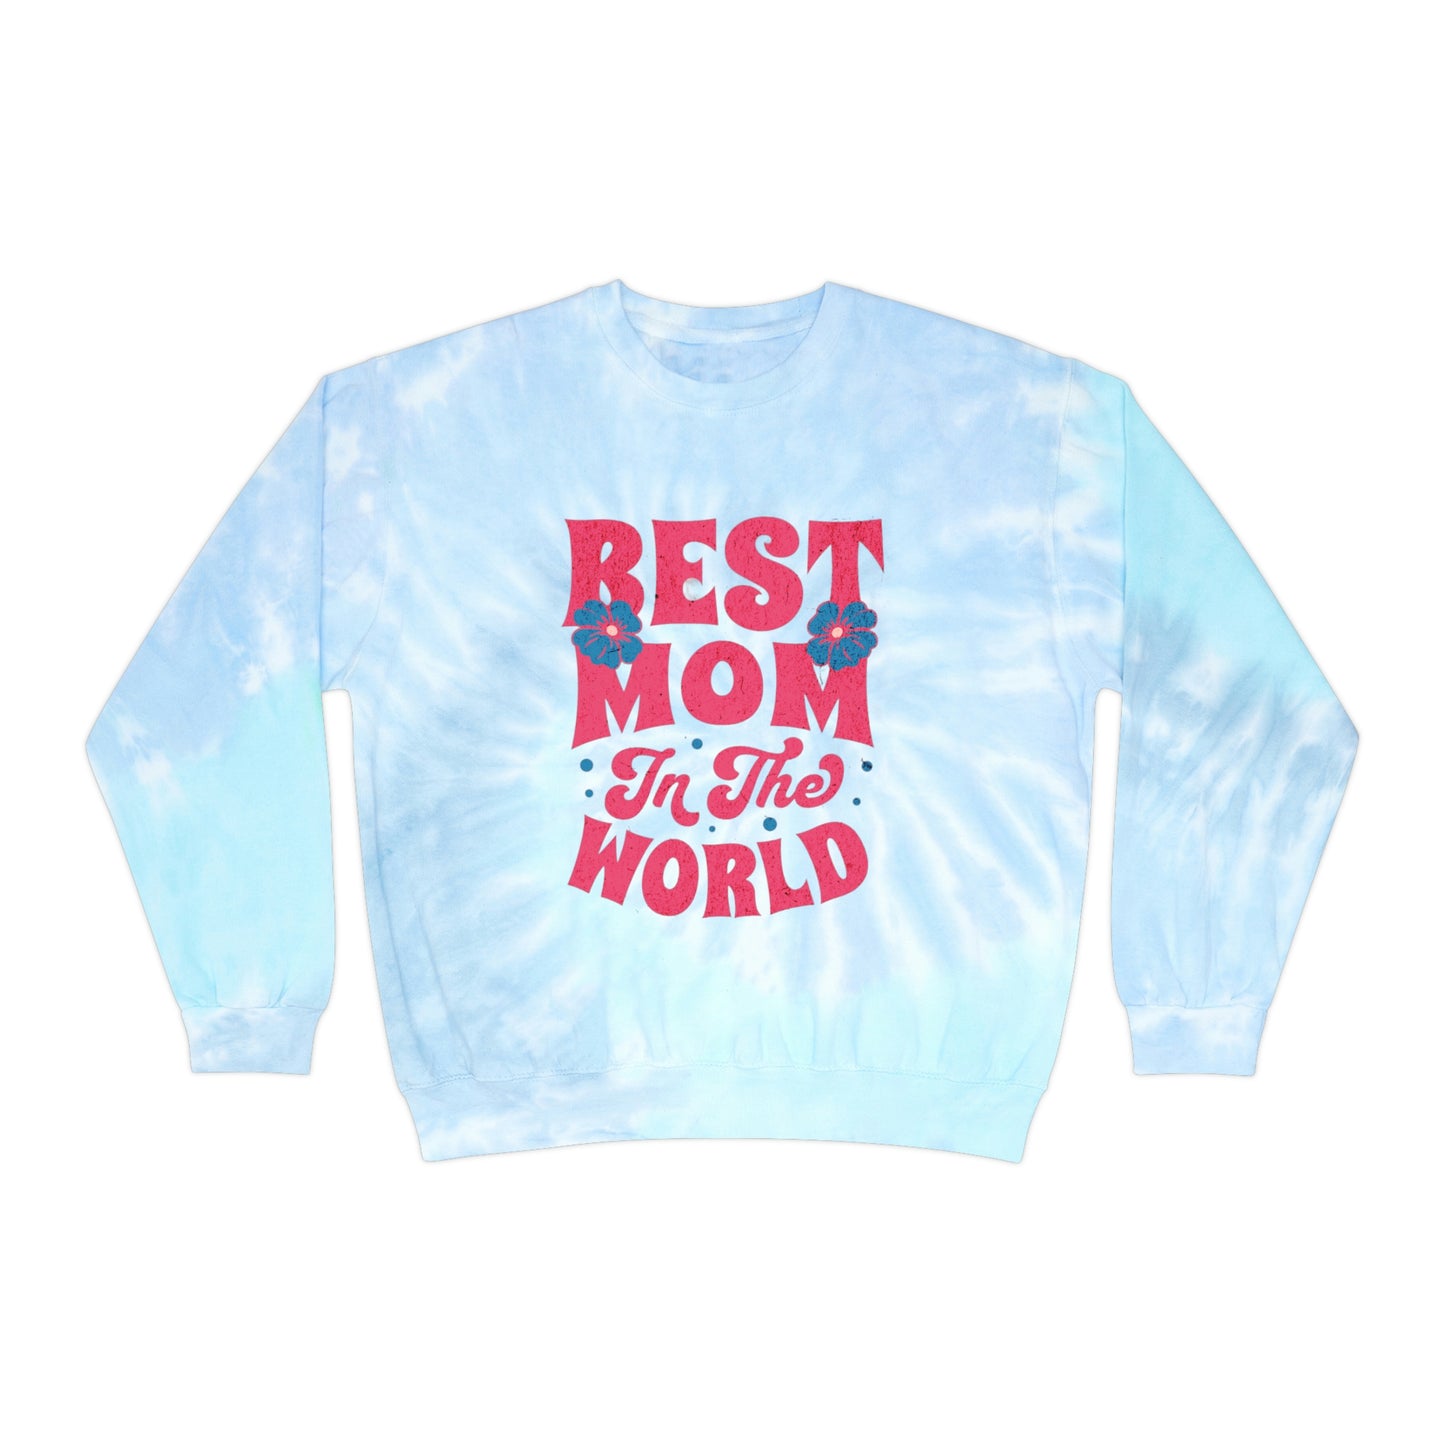 Add some color to your mom's wardrobe with our Best Mom Ever tie-dye sweatshirt!